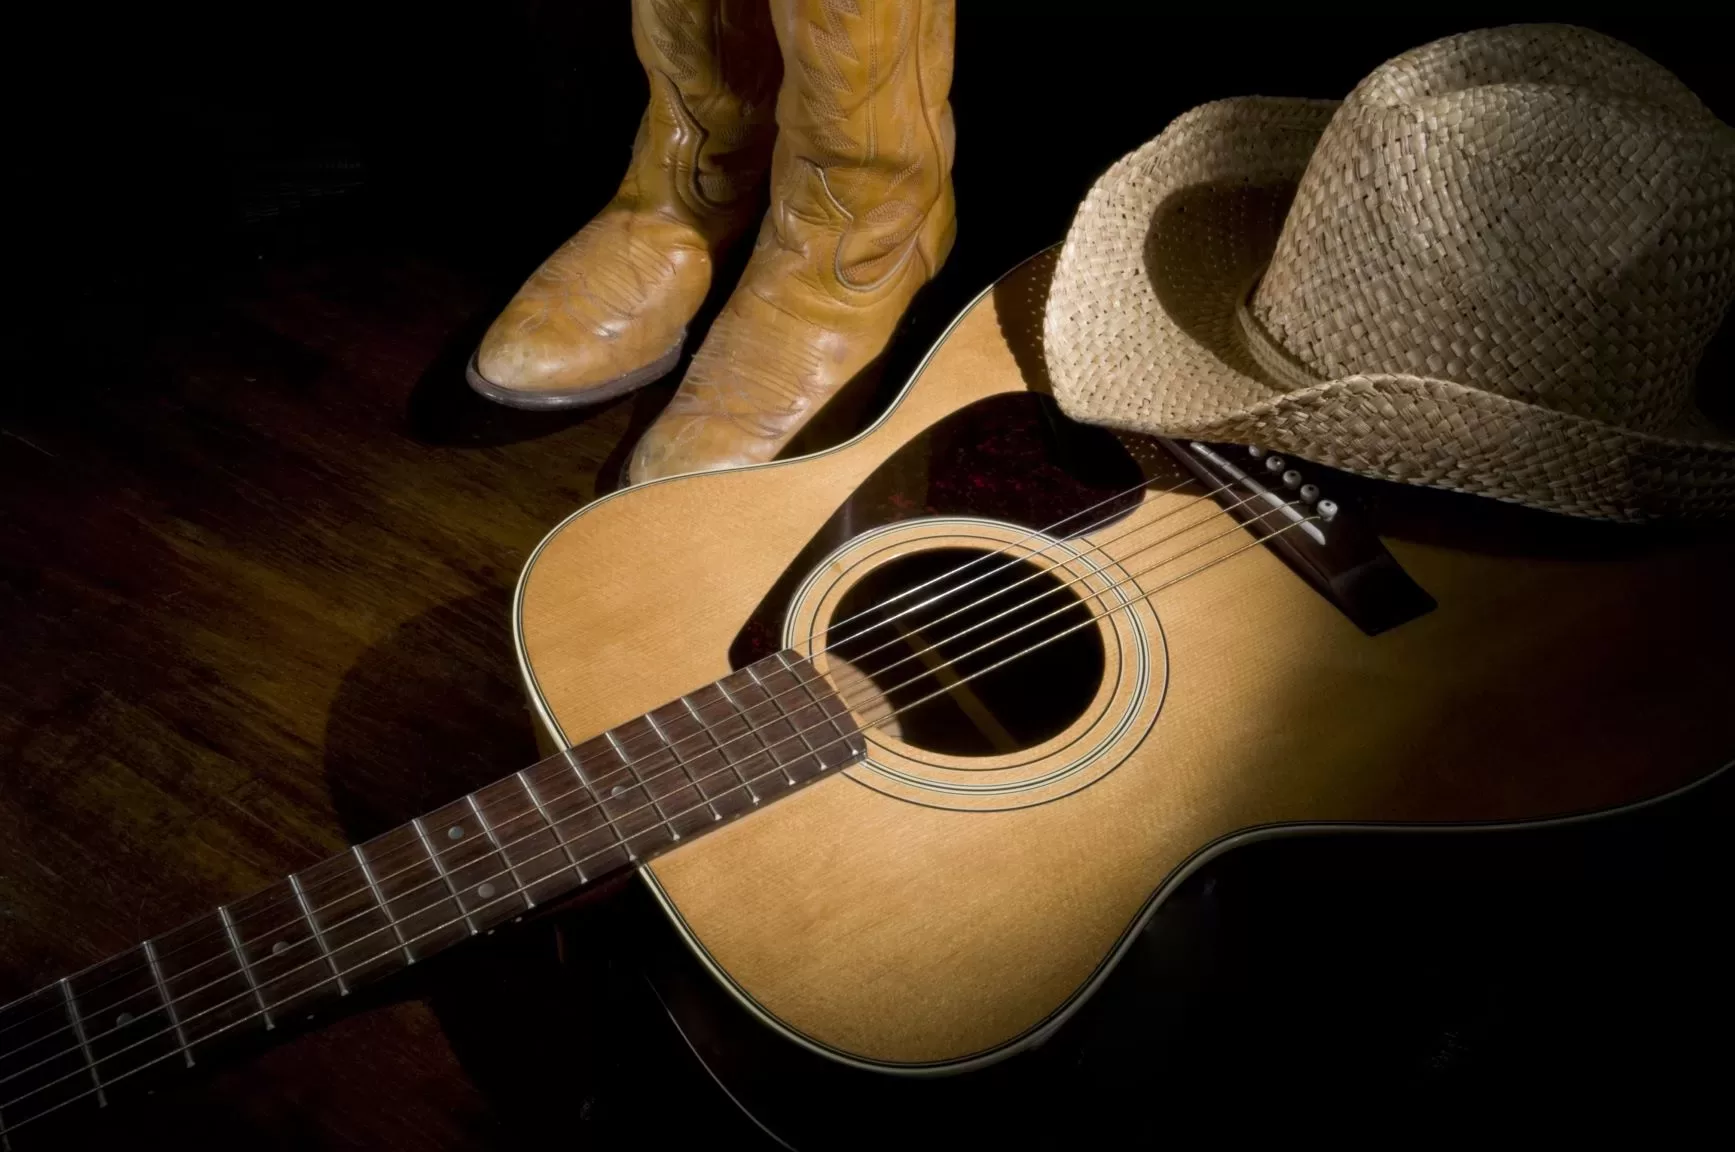 country music can lead one to examine their own life